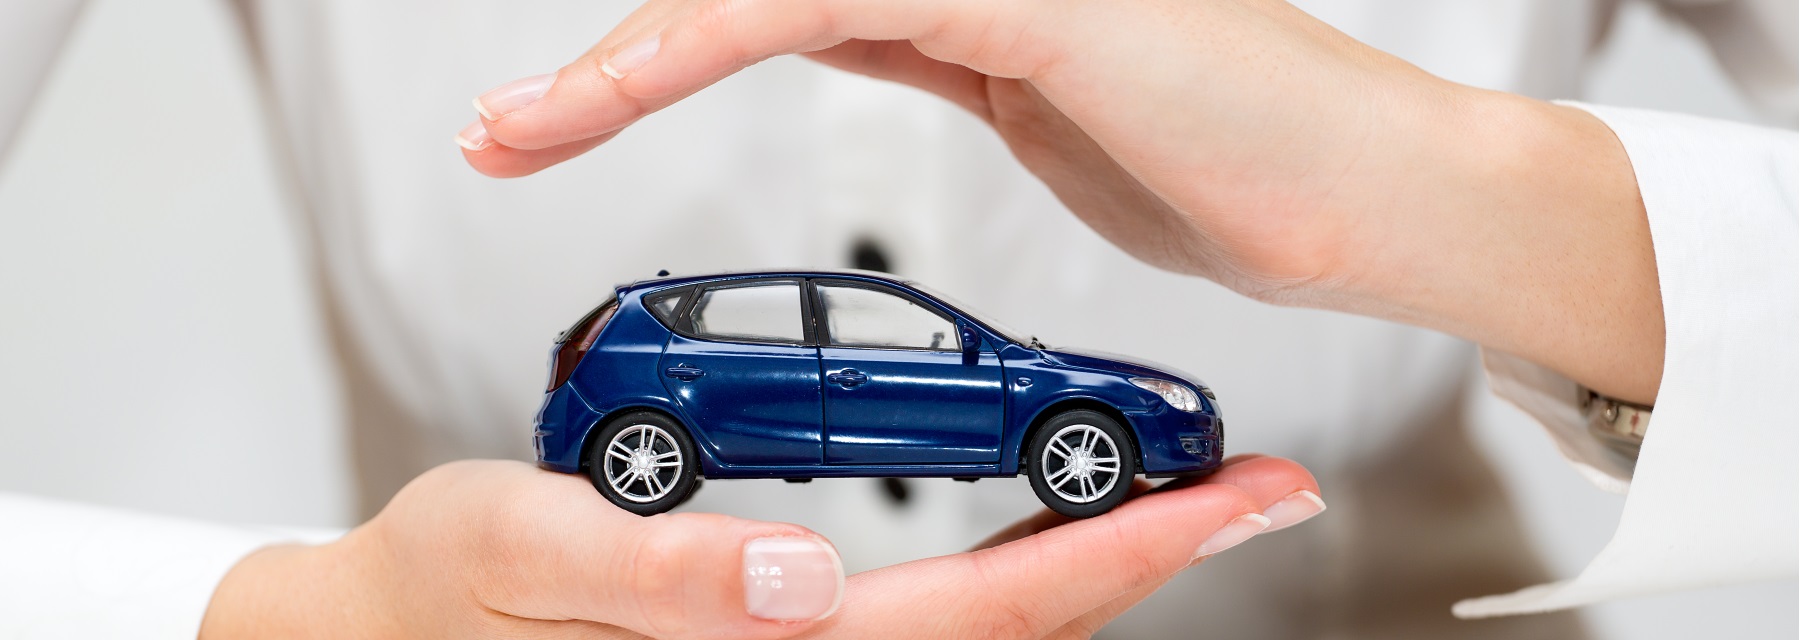 two hands holding miniture blue car